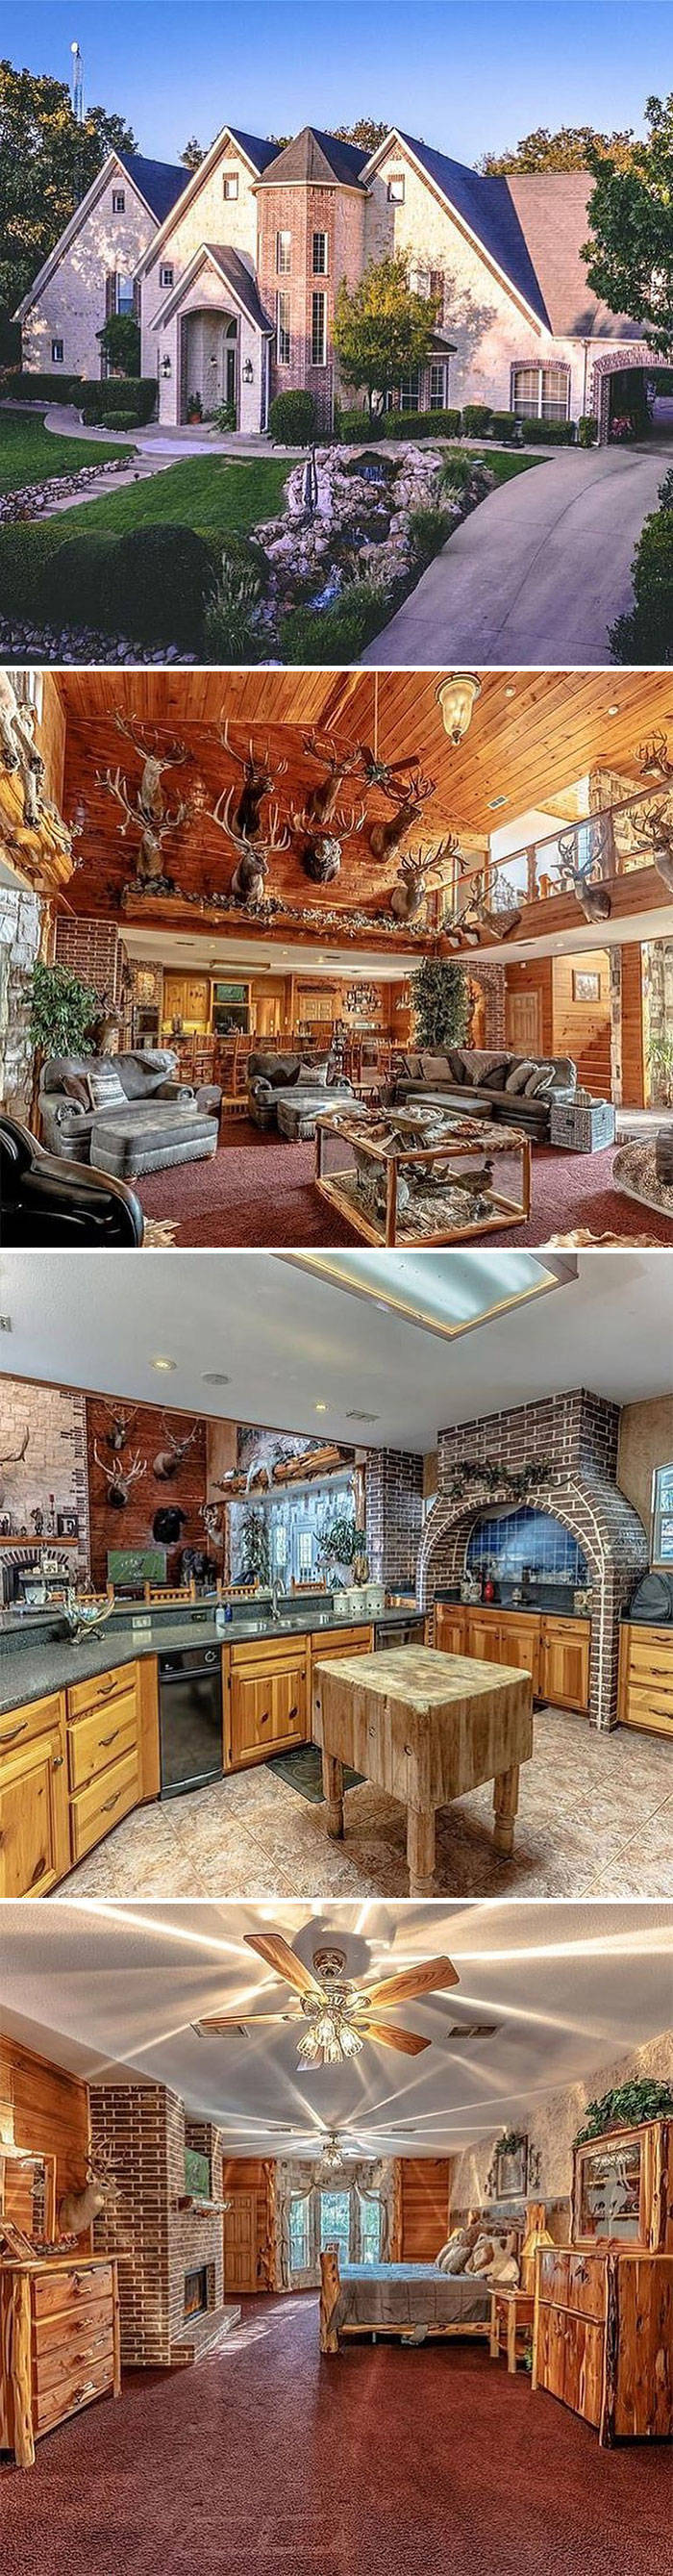 People Share Wild Real Estate Listings They Found Online